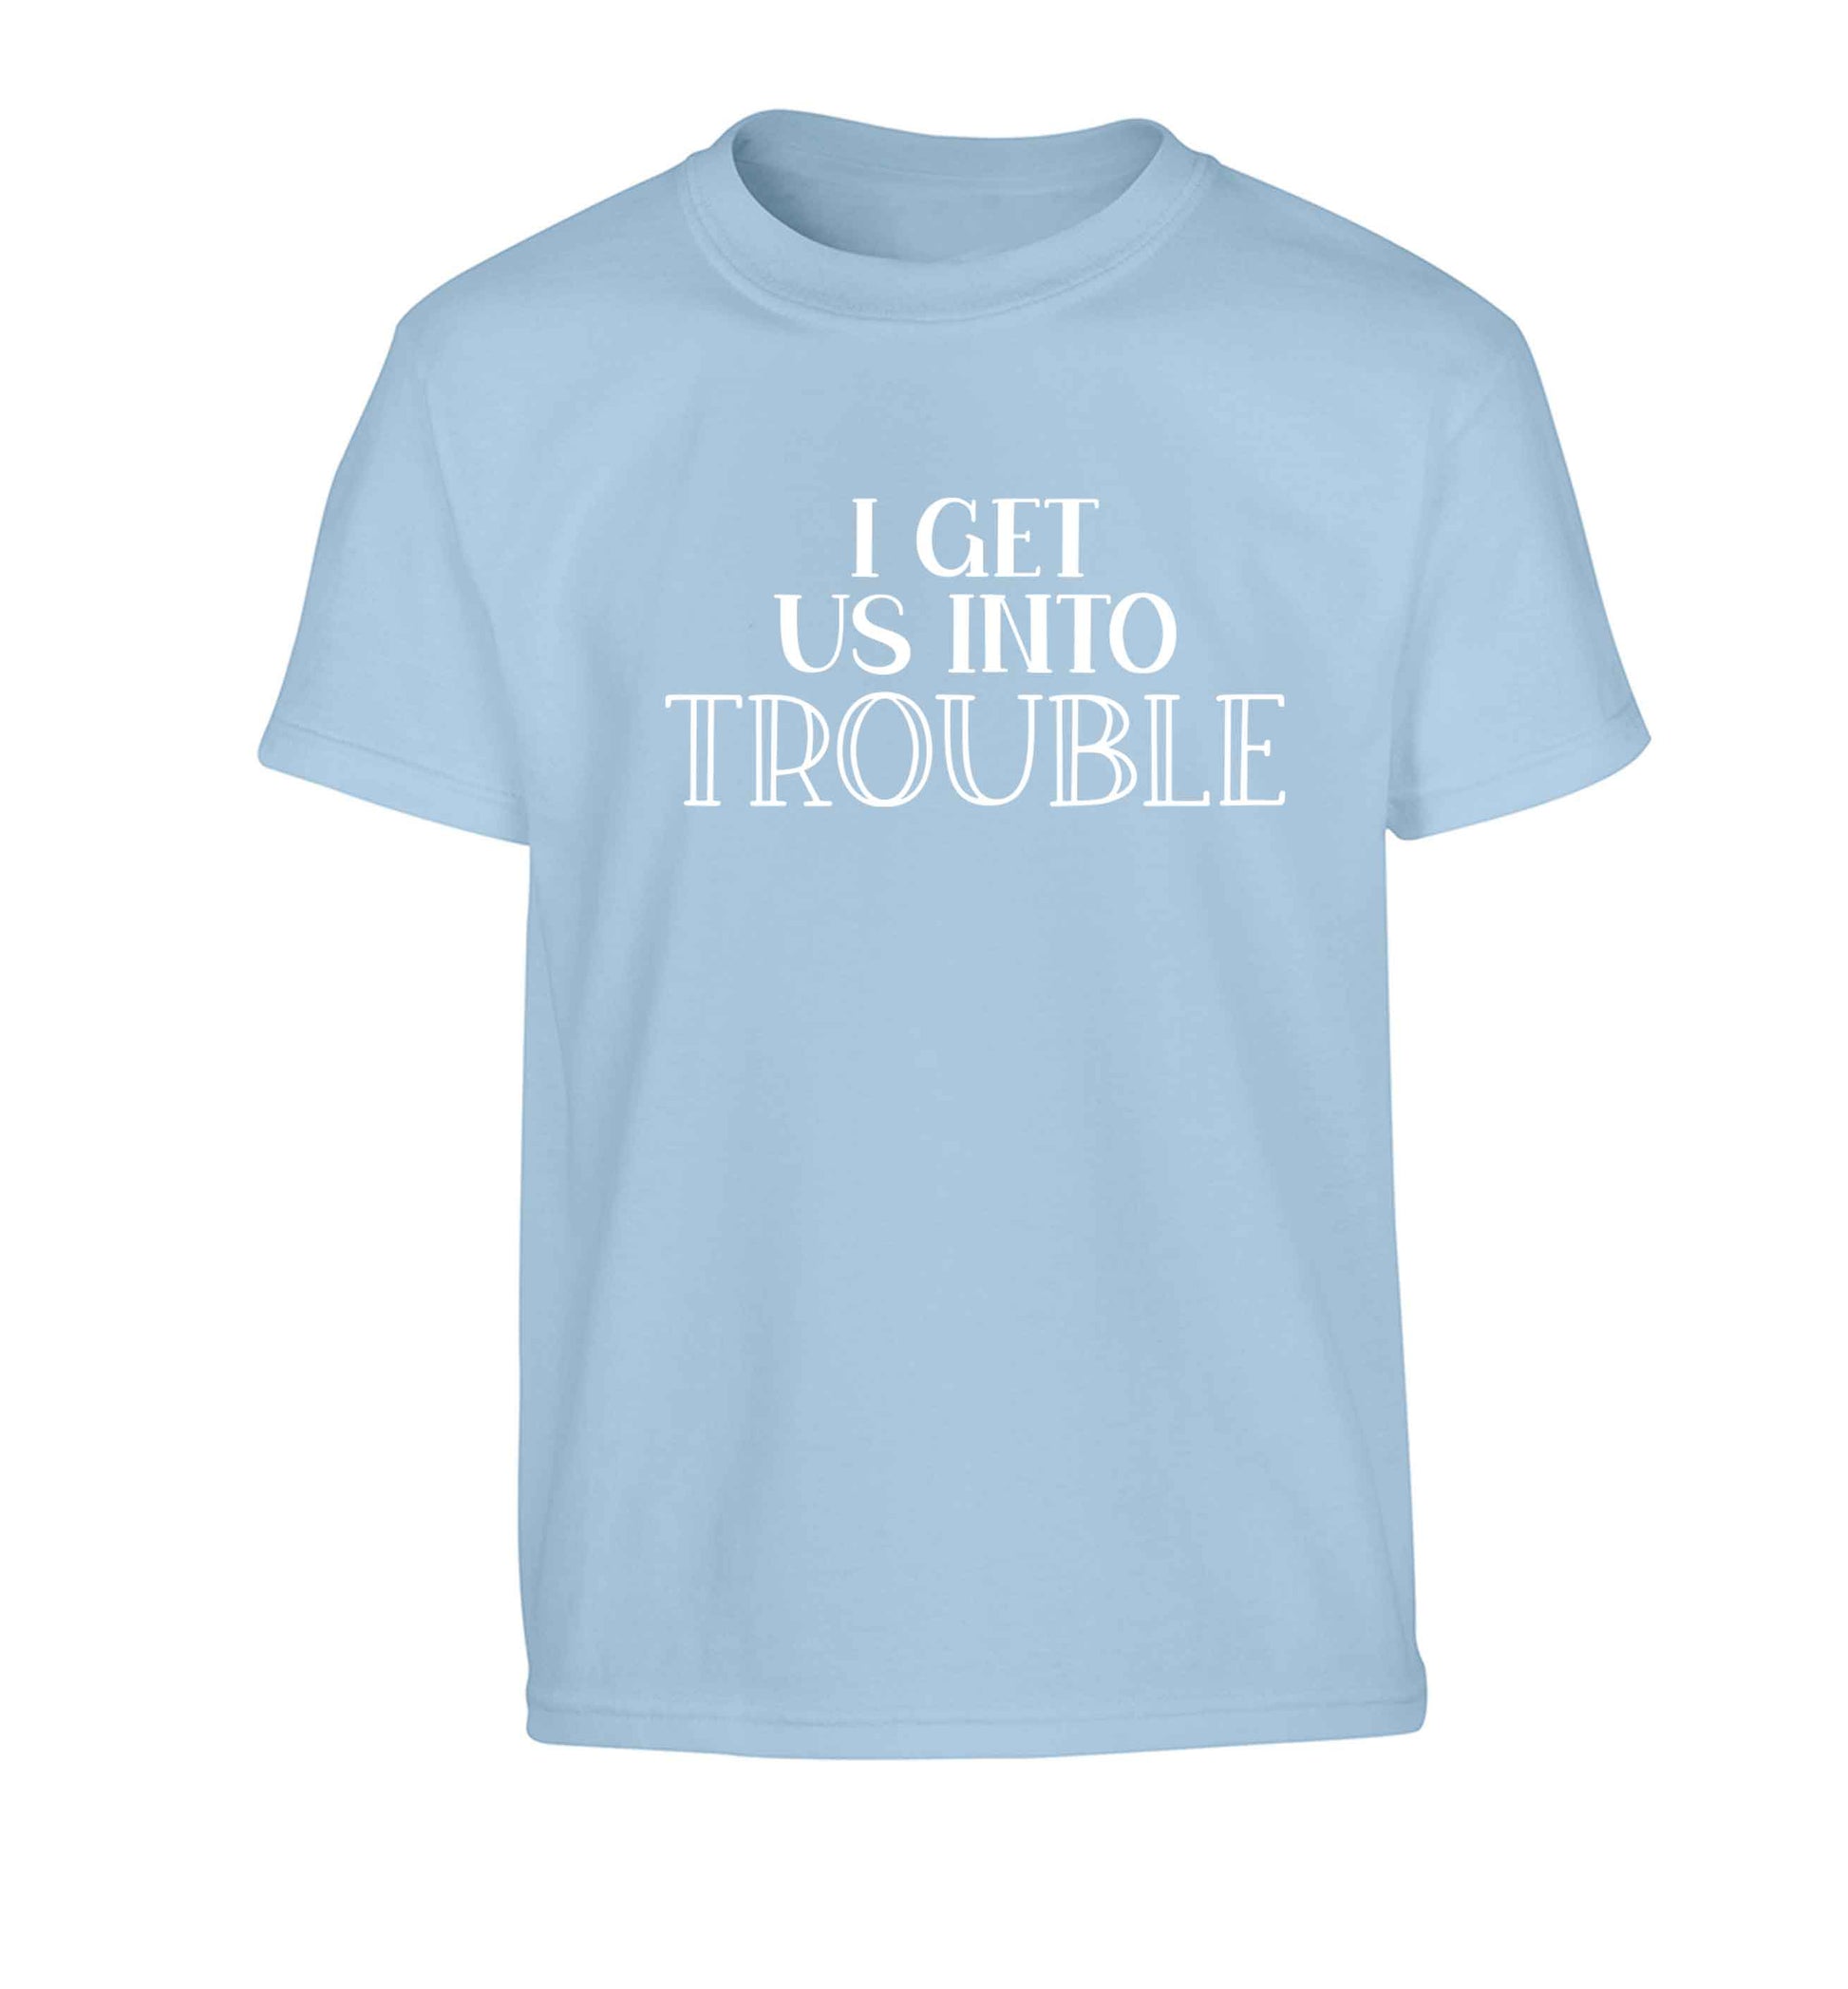 I get us into trouble Children's light blue Tshirt 12-13 Years